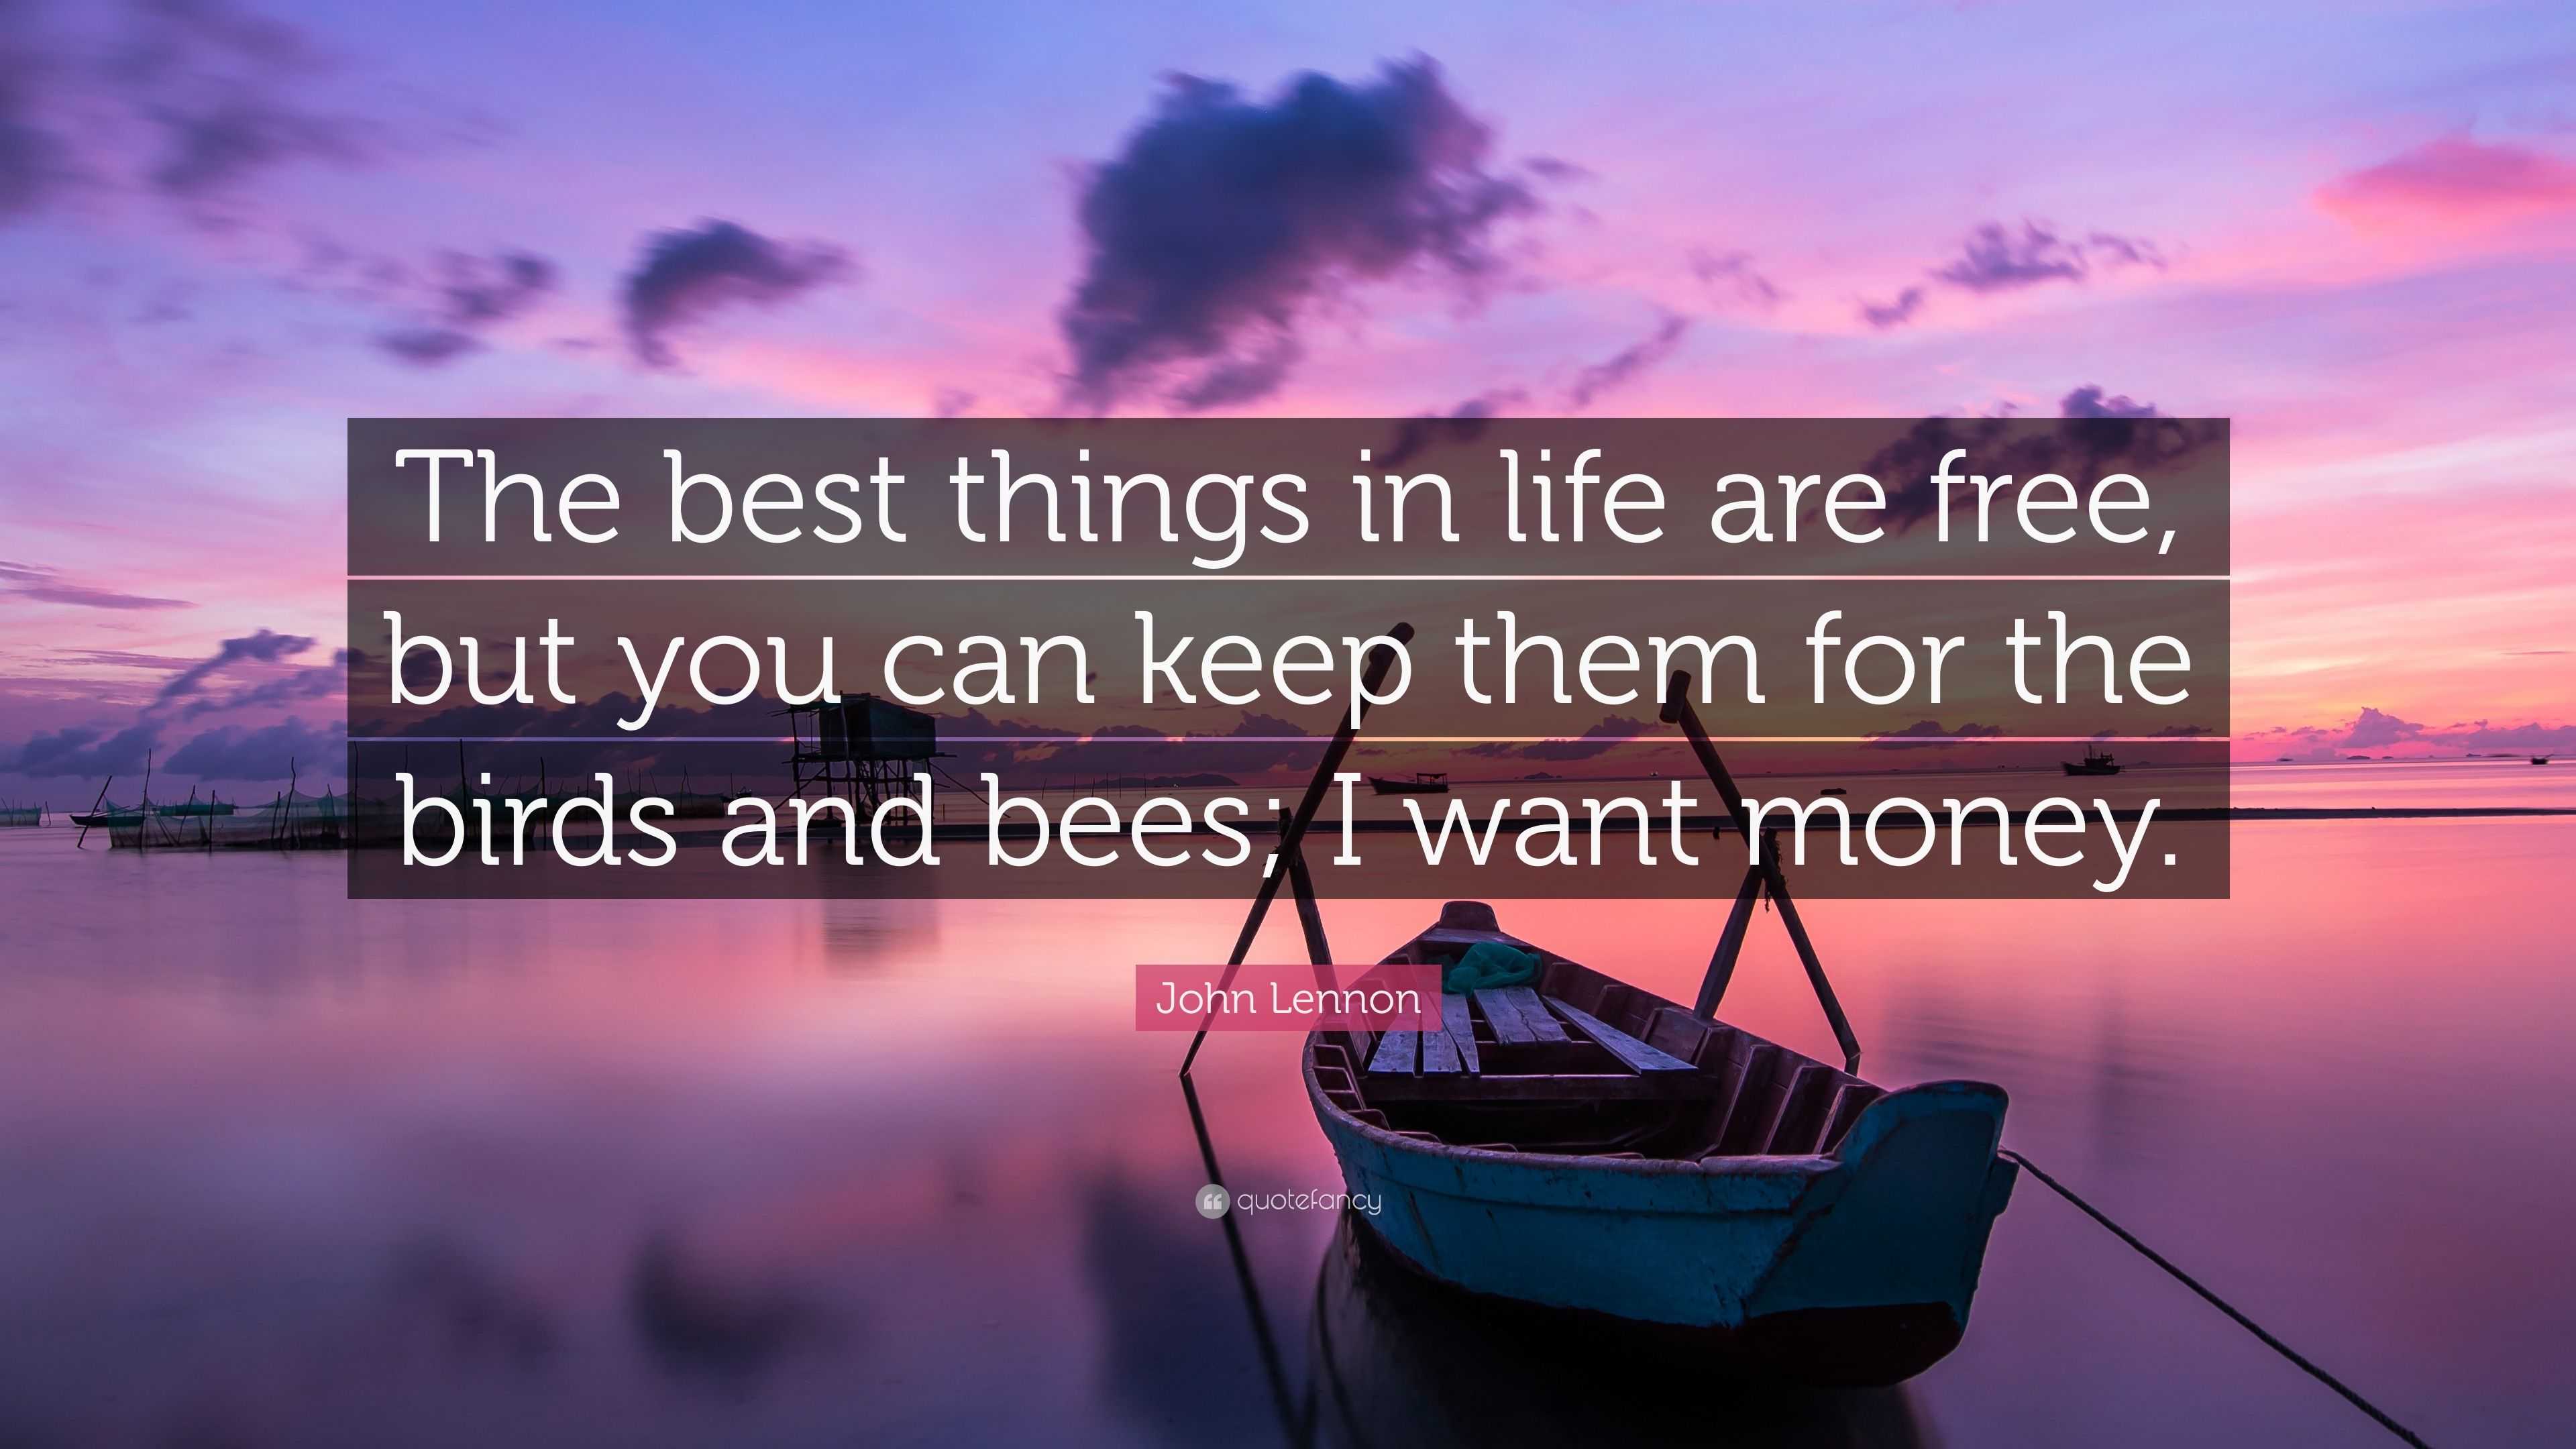 The best things in life are free. The rest are too expensive.